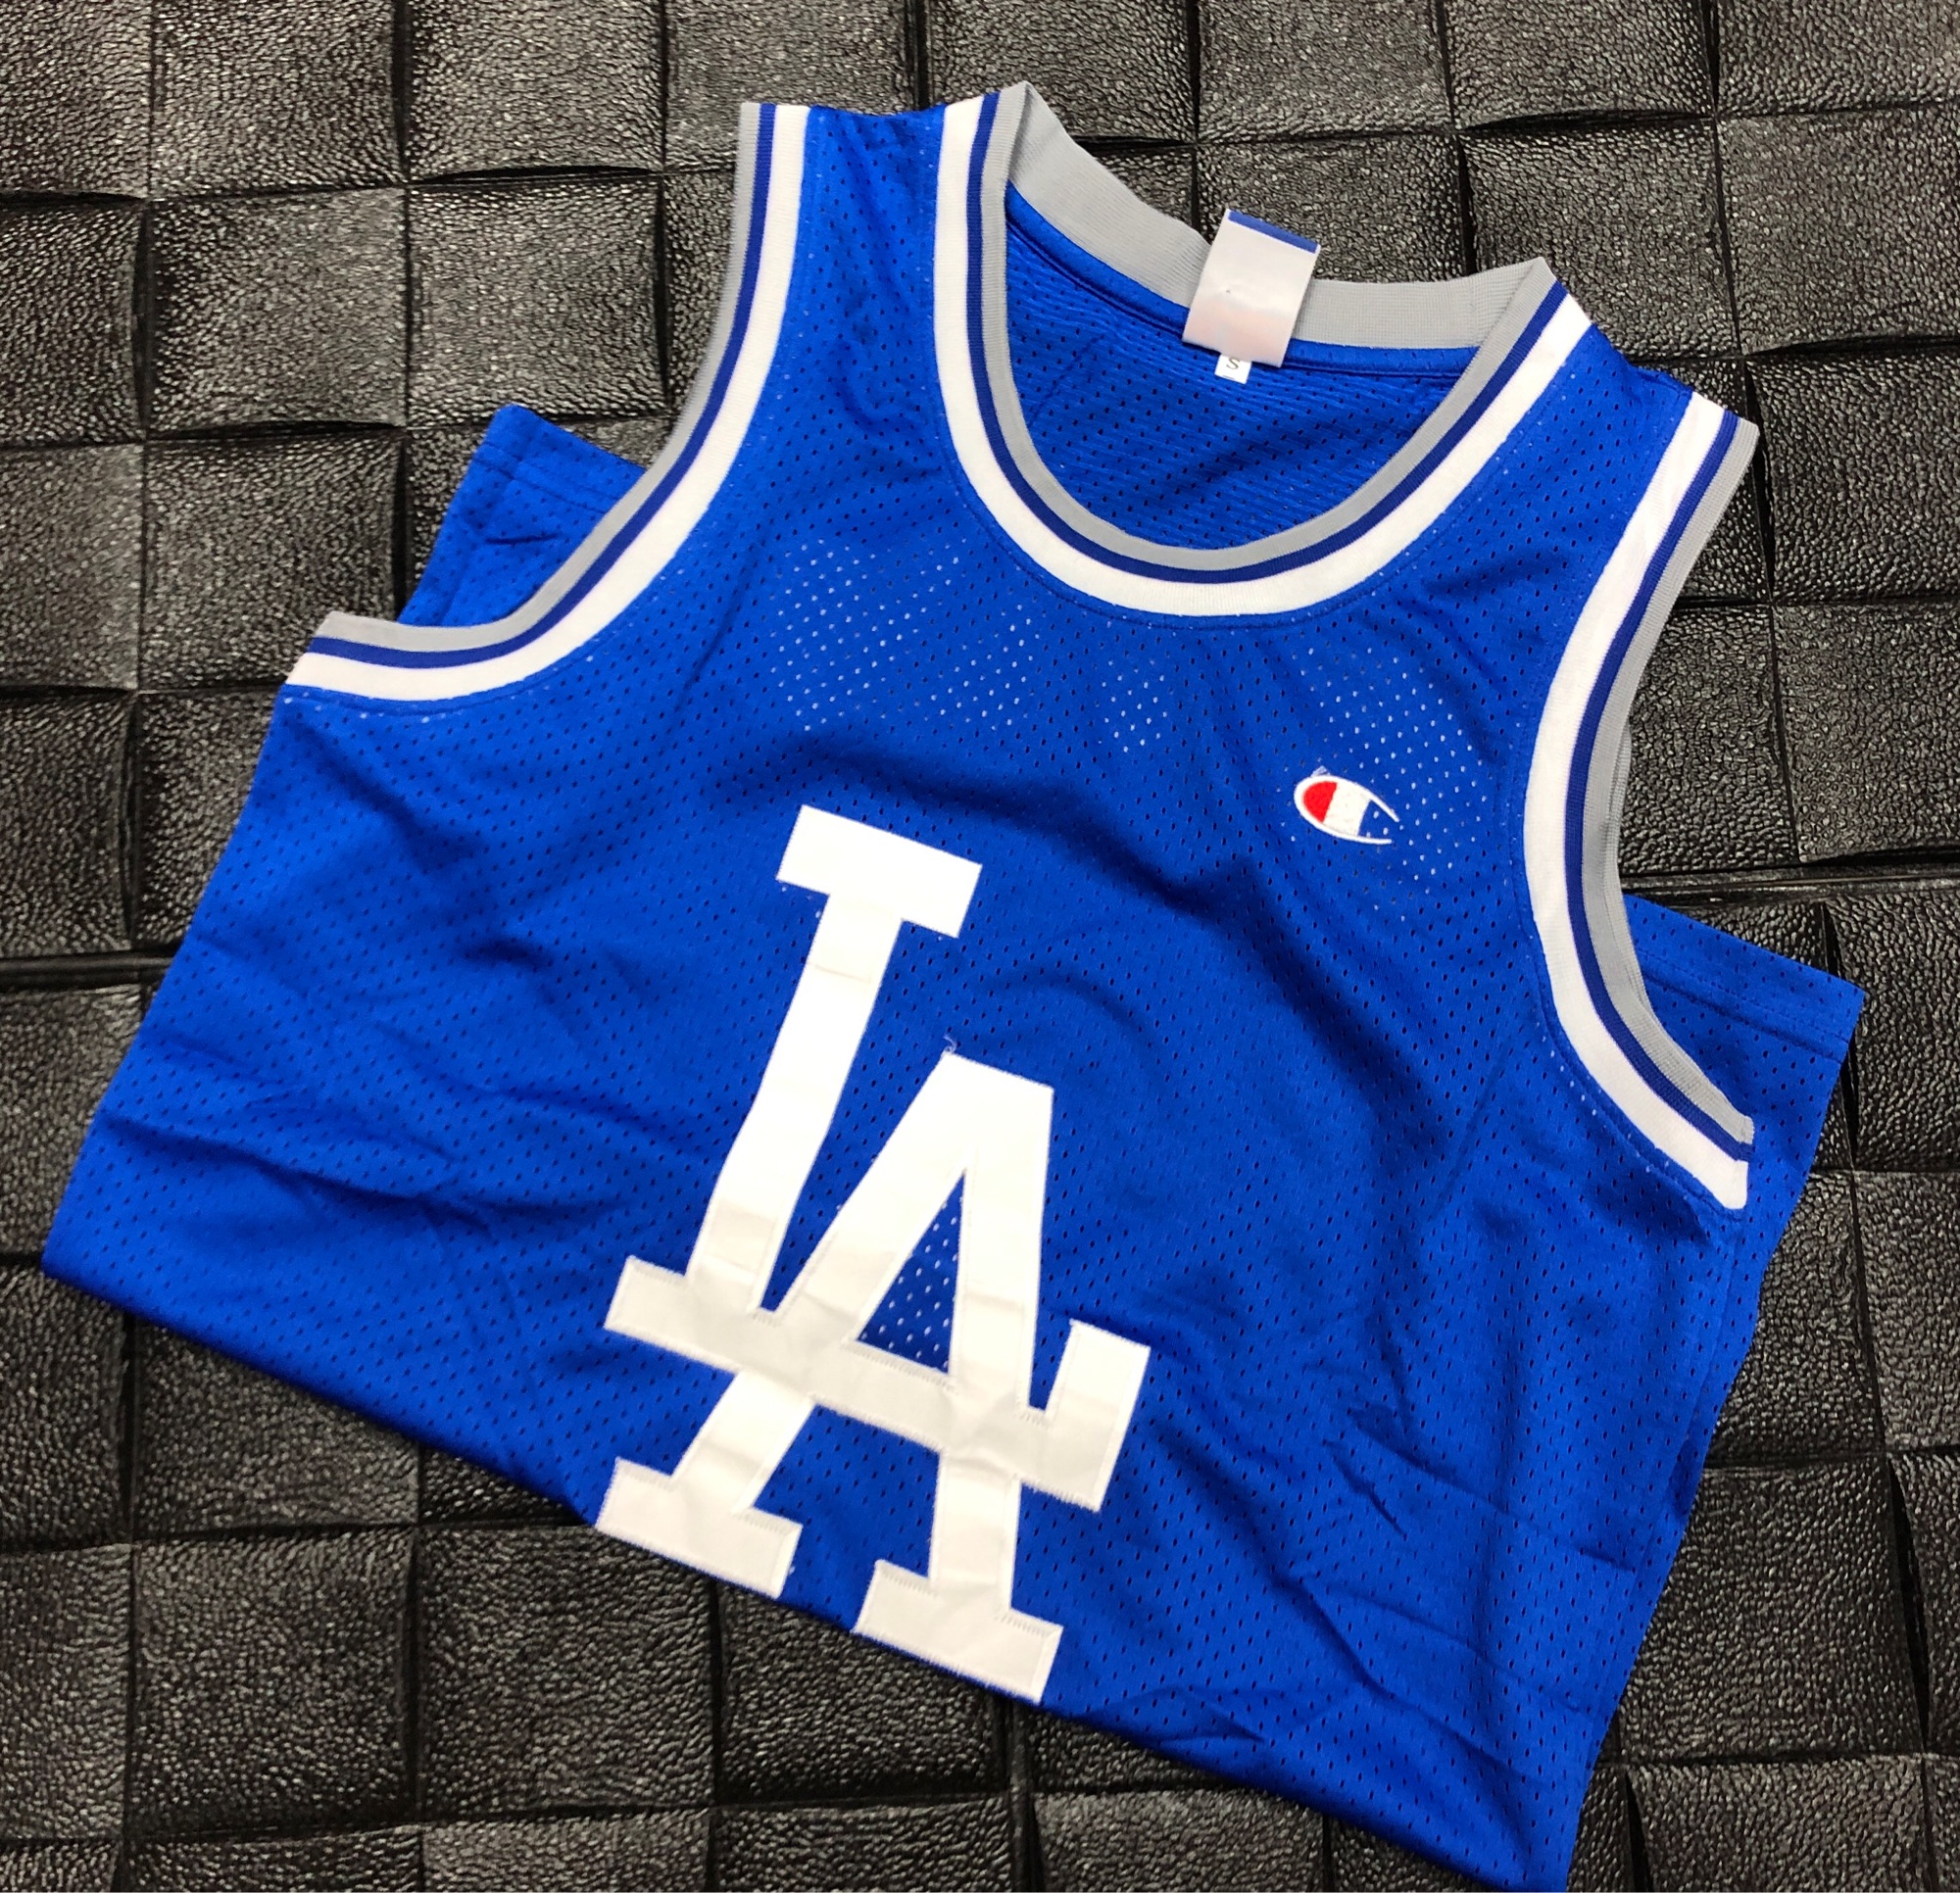 LA Dodgers Basketball Jersey High Quality For men jersey.